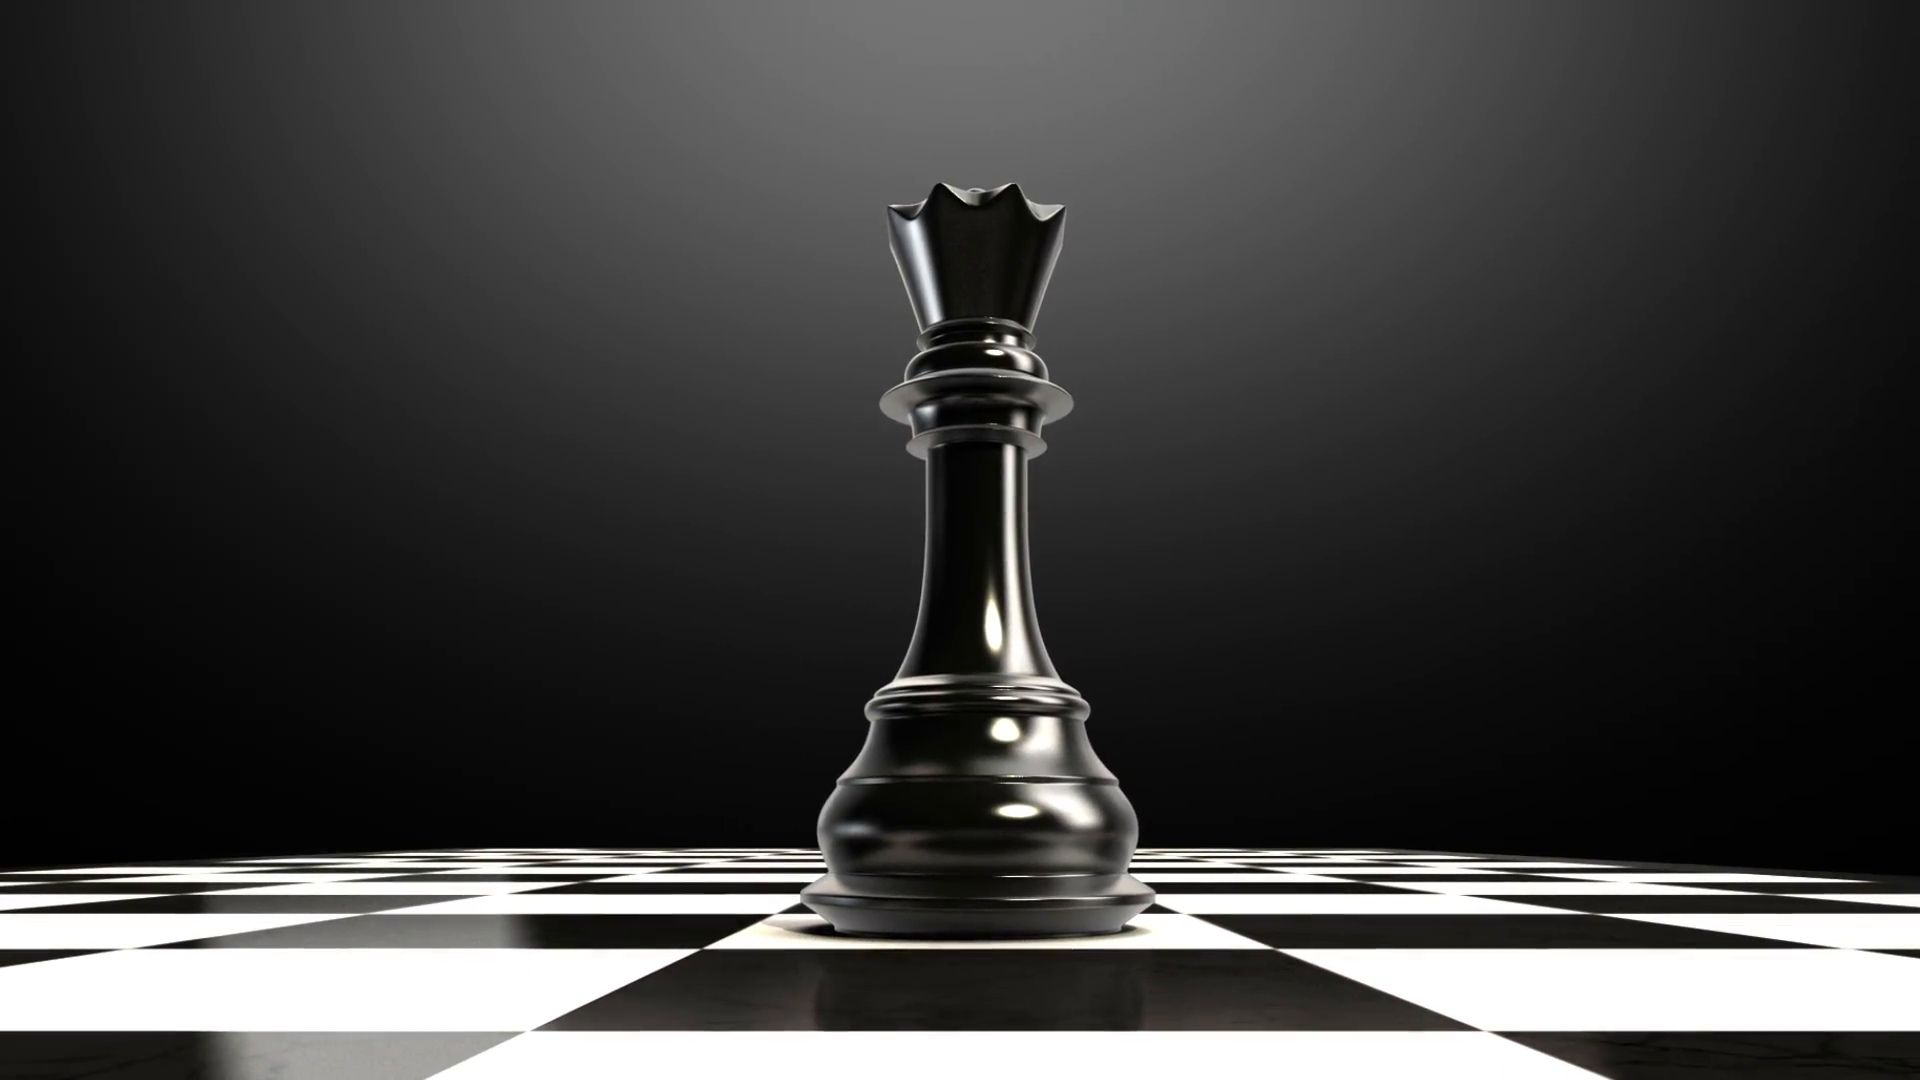 Wallpaper chess, Board, Queen for mobile and desktop, section